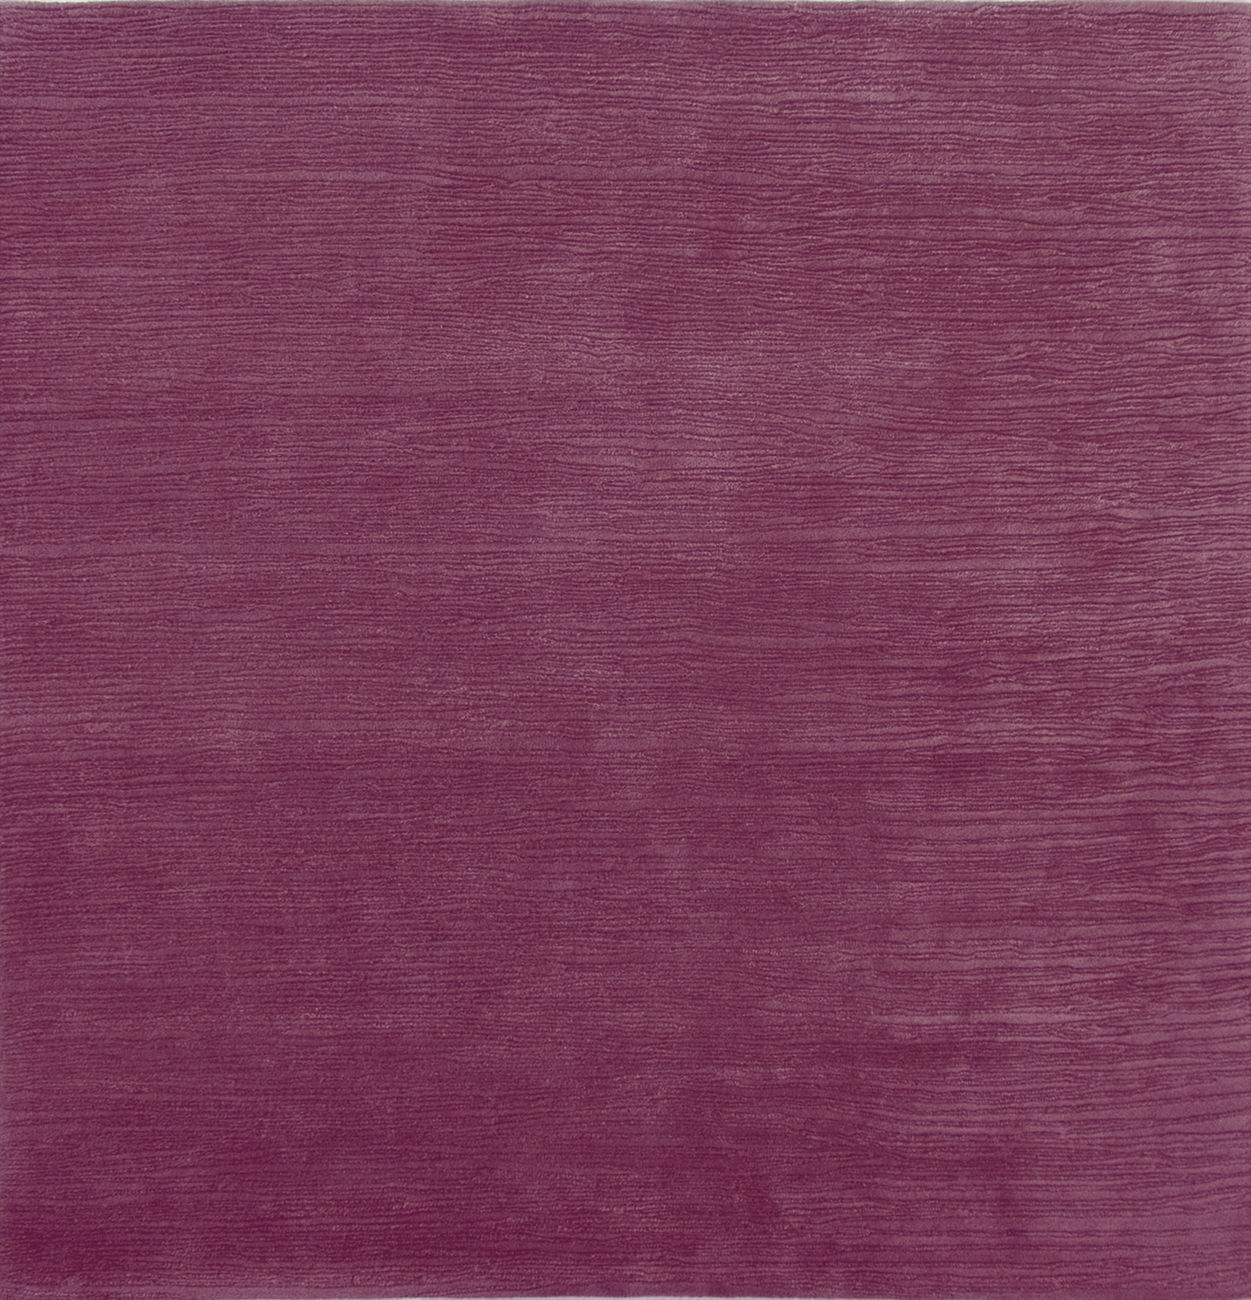 Raspberry Solid Shore Wool Rug Product Image